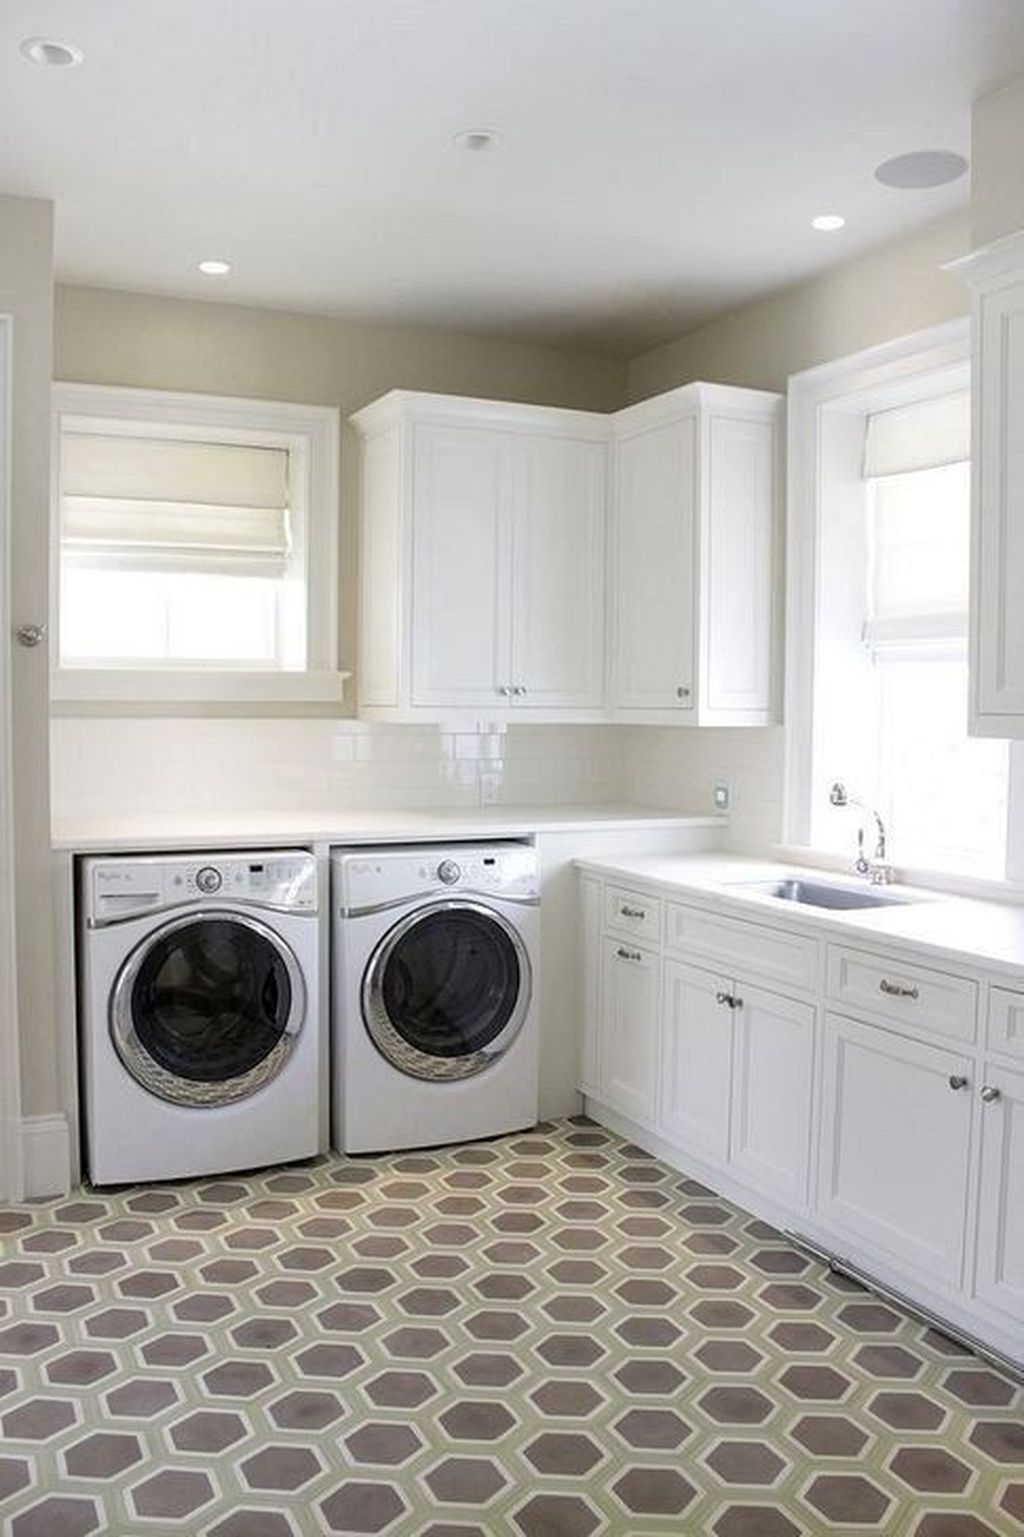 Inspiring Laundry Room Design With French Country Style 08